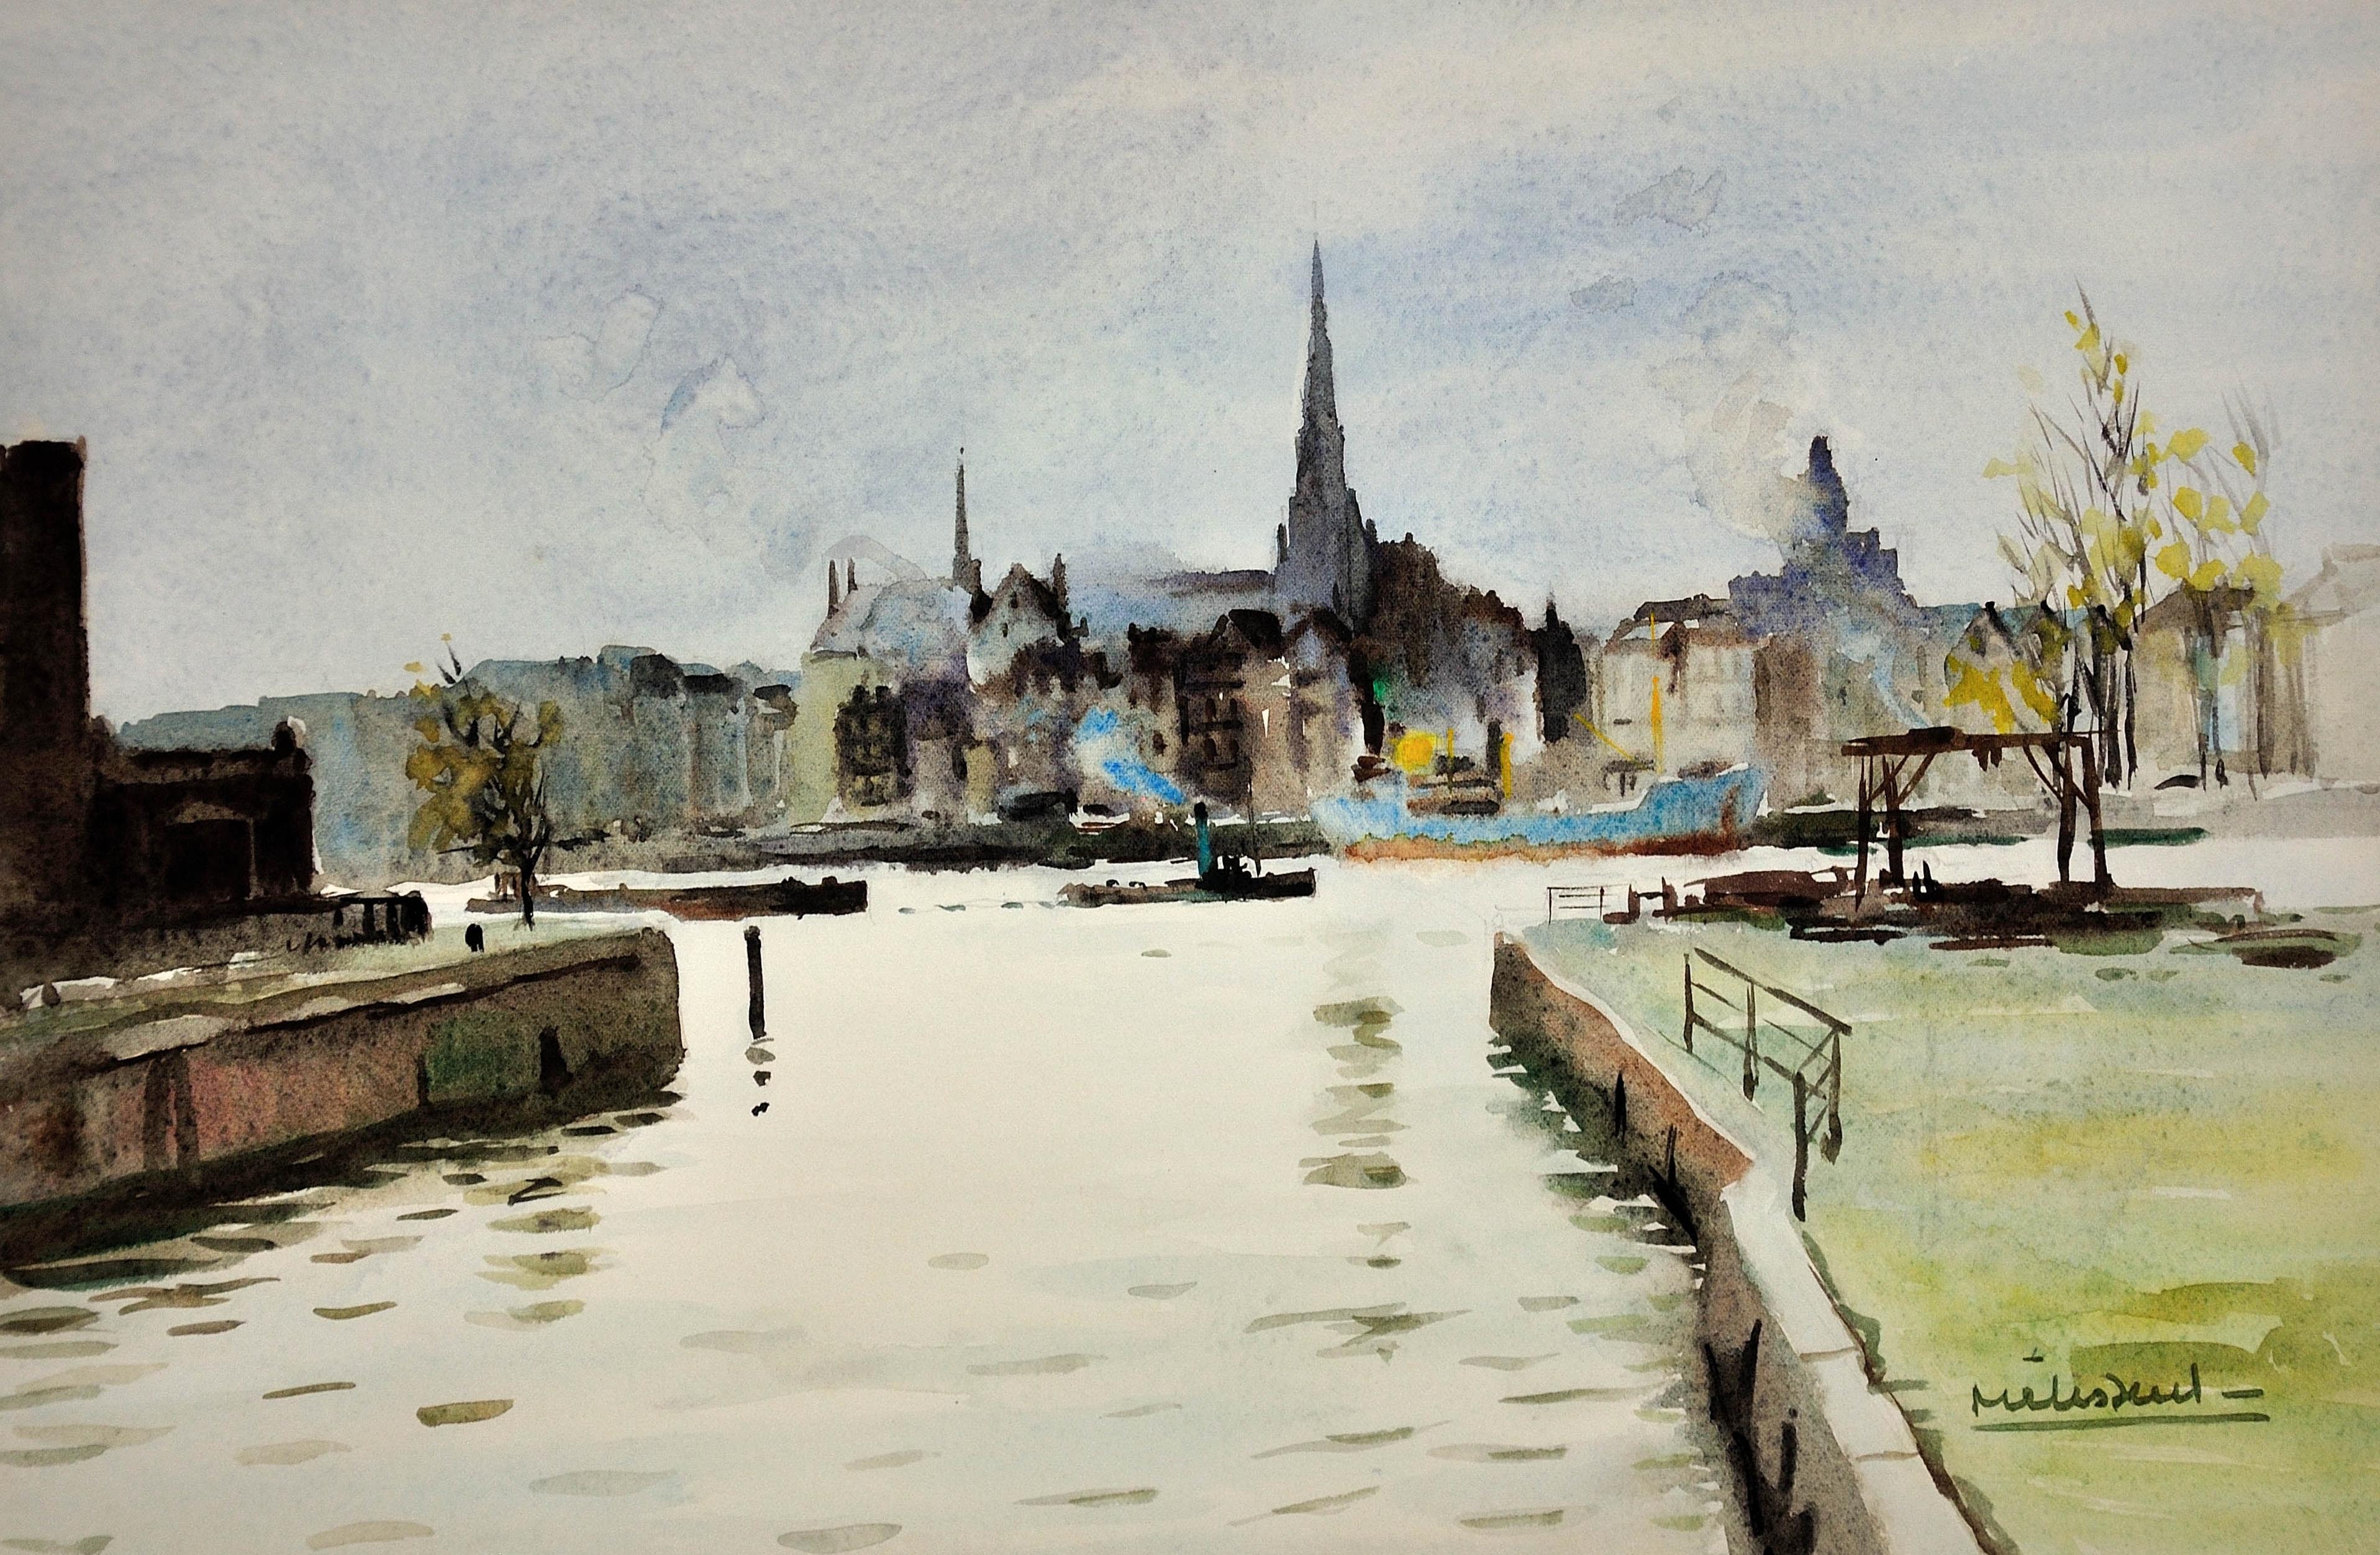 The Maritime District, Rotterdam. 1950s. Docklands. Canals. Churches. Watercolor - Art by Maurice Raoul Melissent